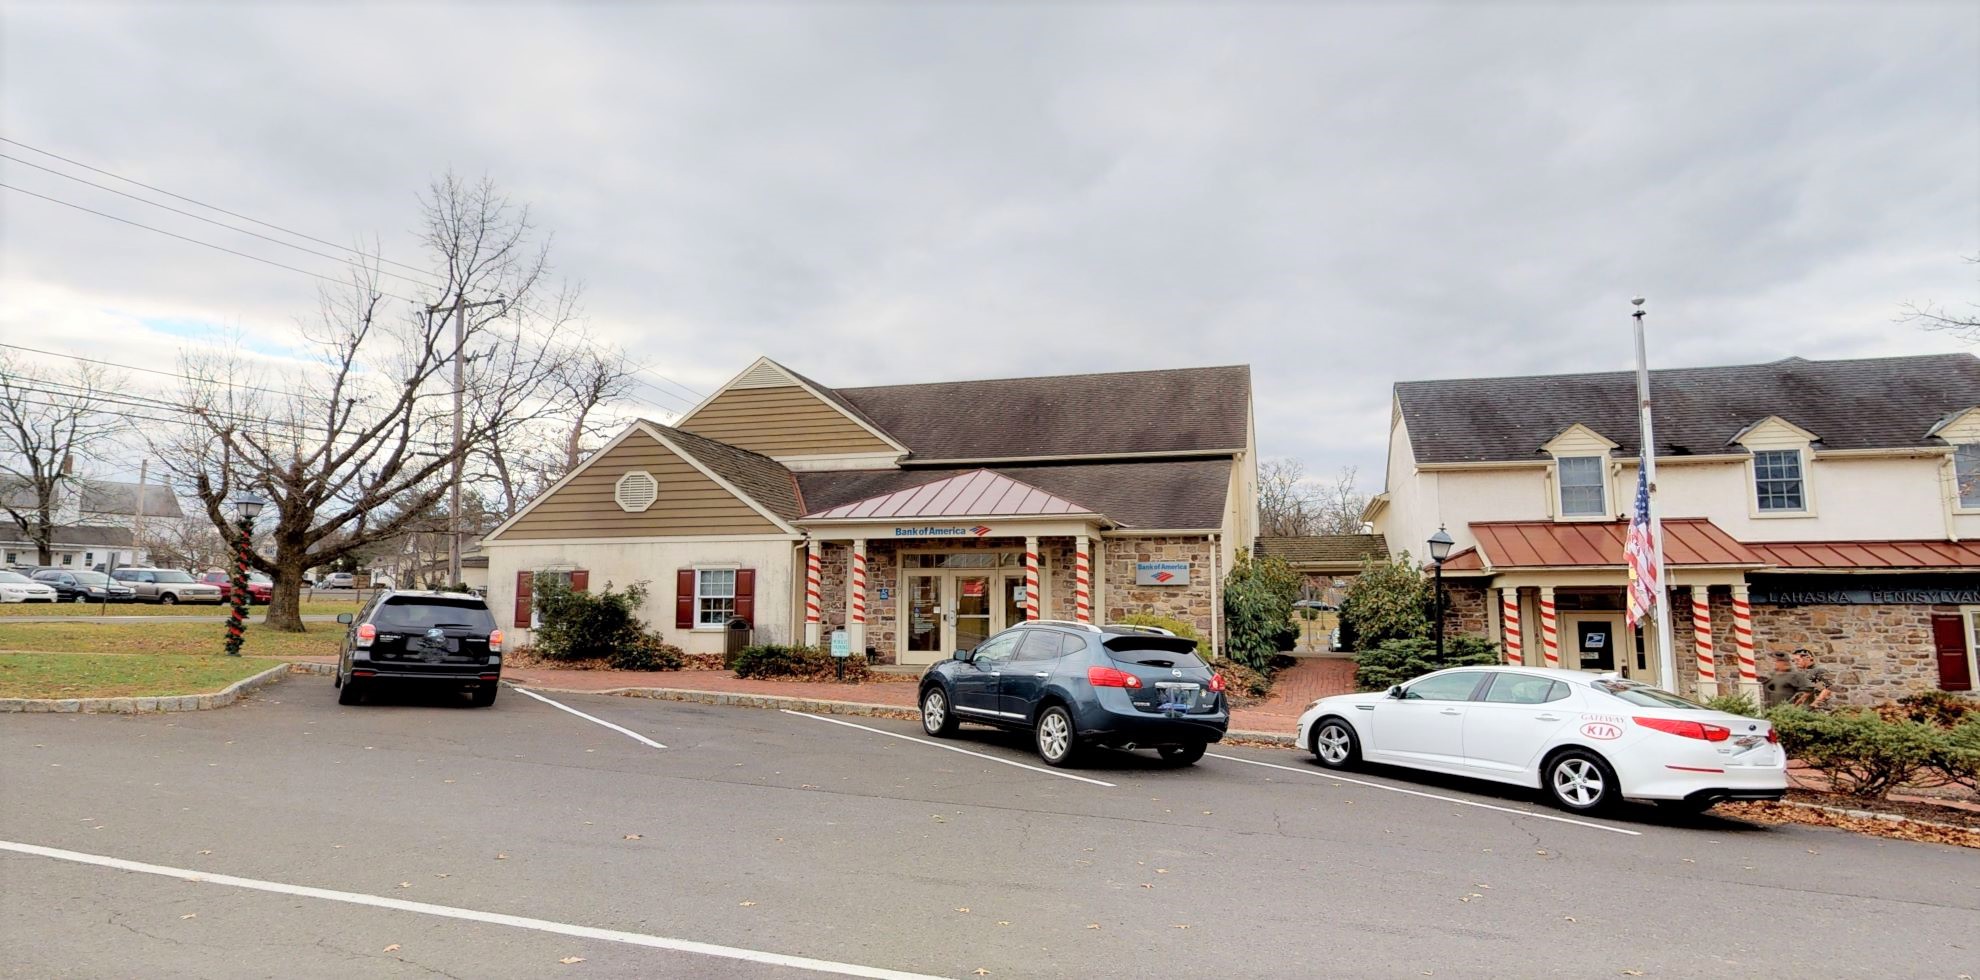 Bank of America financial center with walk-up ATM | 167 Carousel Ln, Lahaska, PA 18931